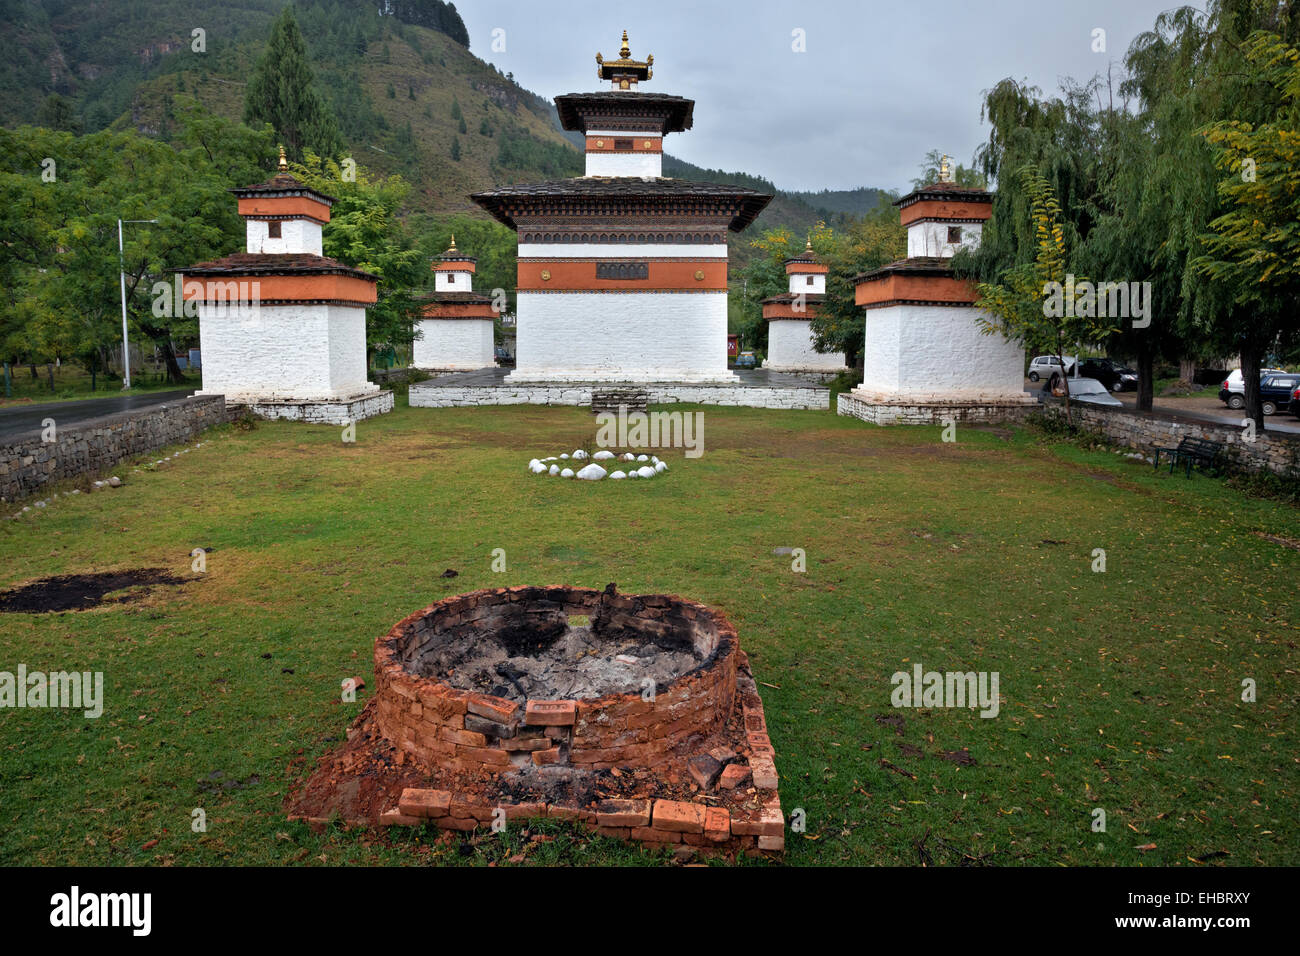 BU00313-00...BHUTAN - The Five Chortens welcome visitors to the town of Paro. Stock Photo